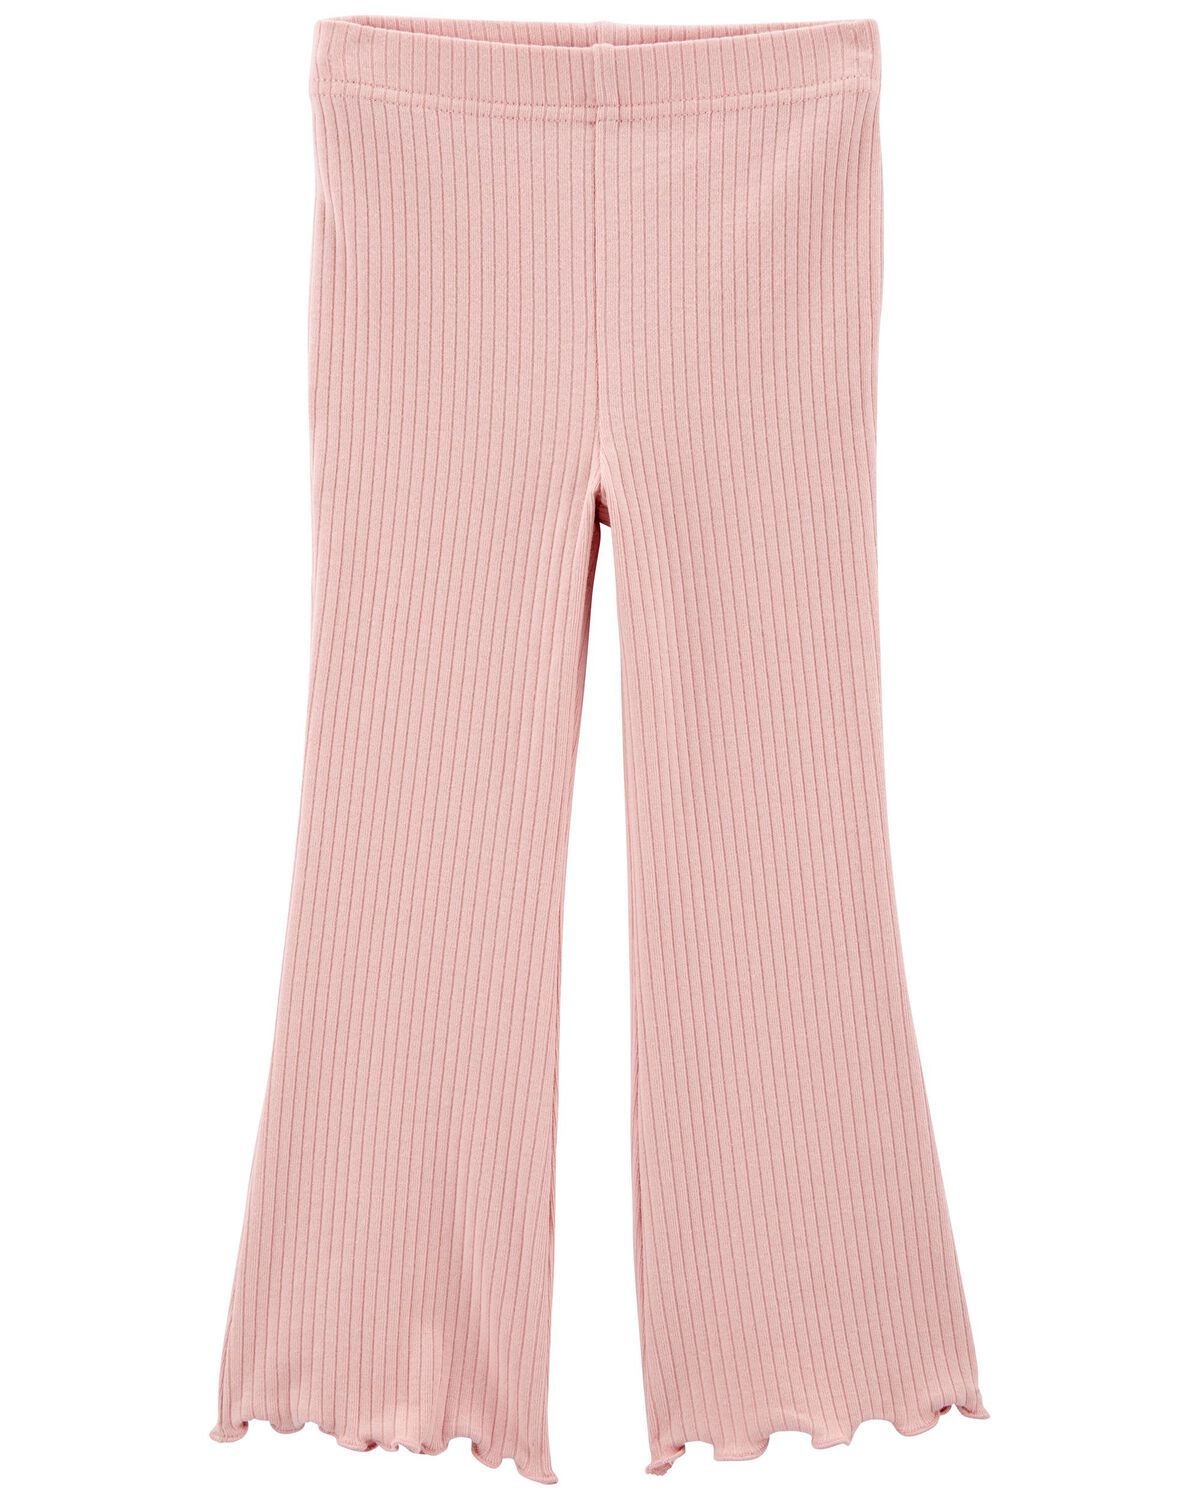 Pink Toddler Pull-On Flare Pants | carters.com | Carter's